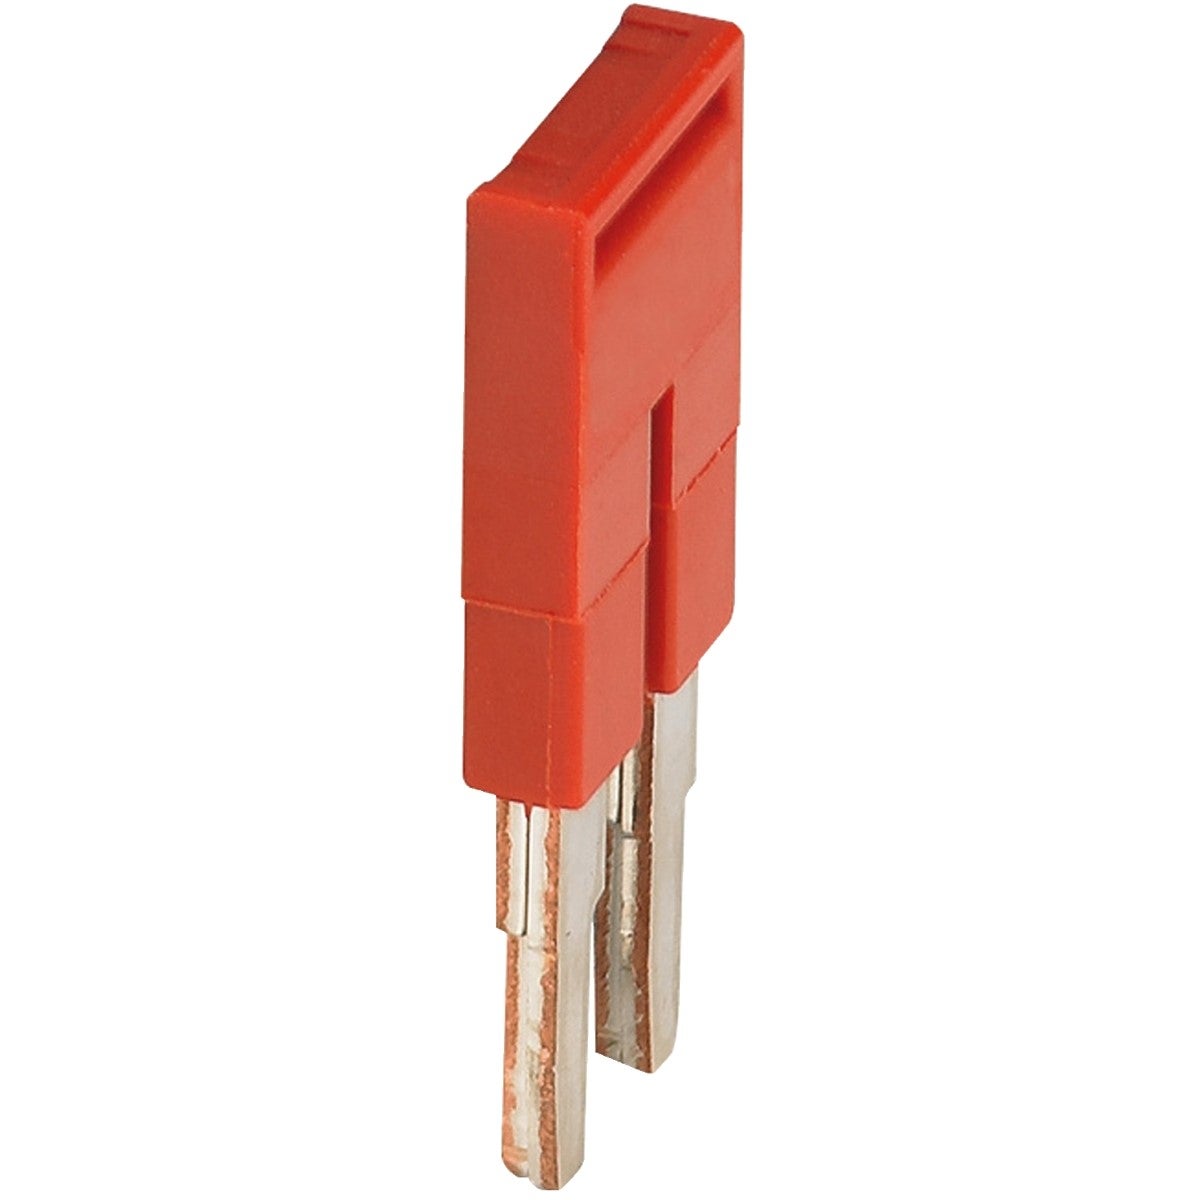 PLUG-IN BRIDGE, 2POINTS FOR 2,5MM² TERMINAL BLOCKS, RED